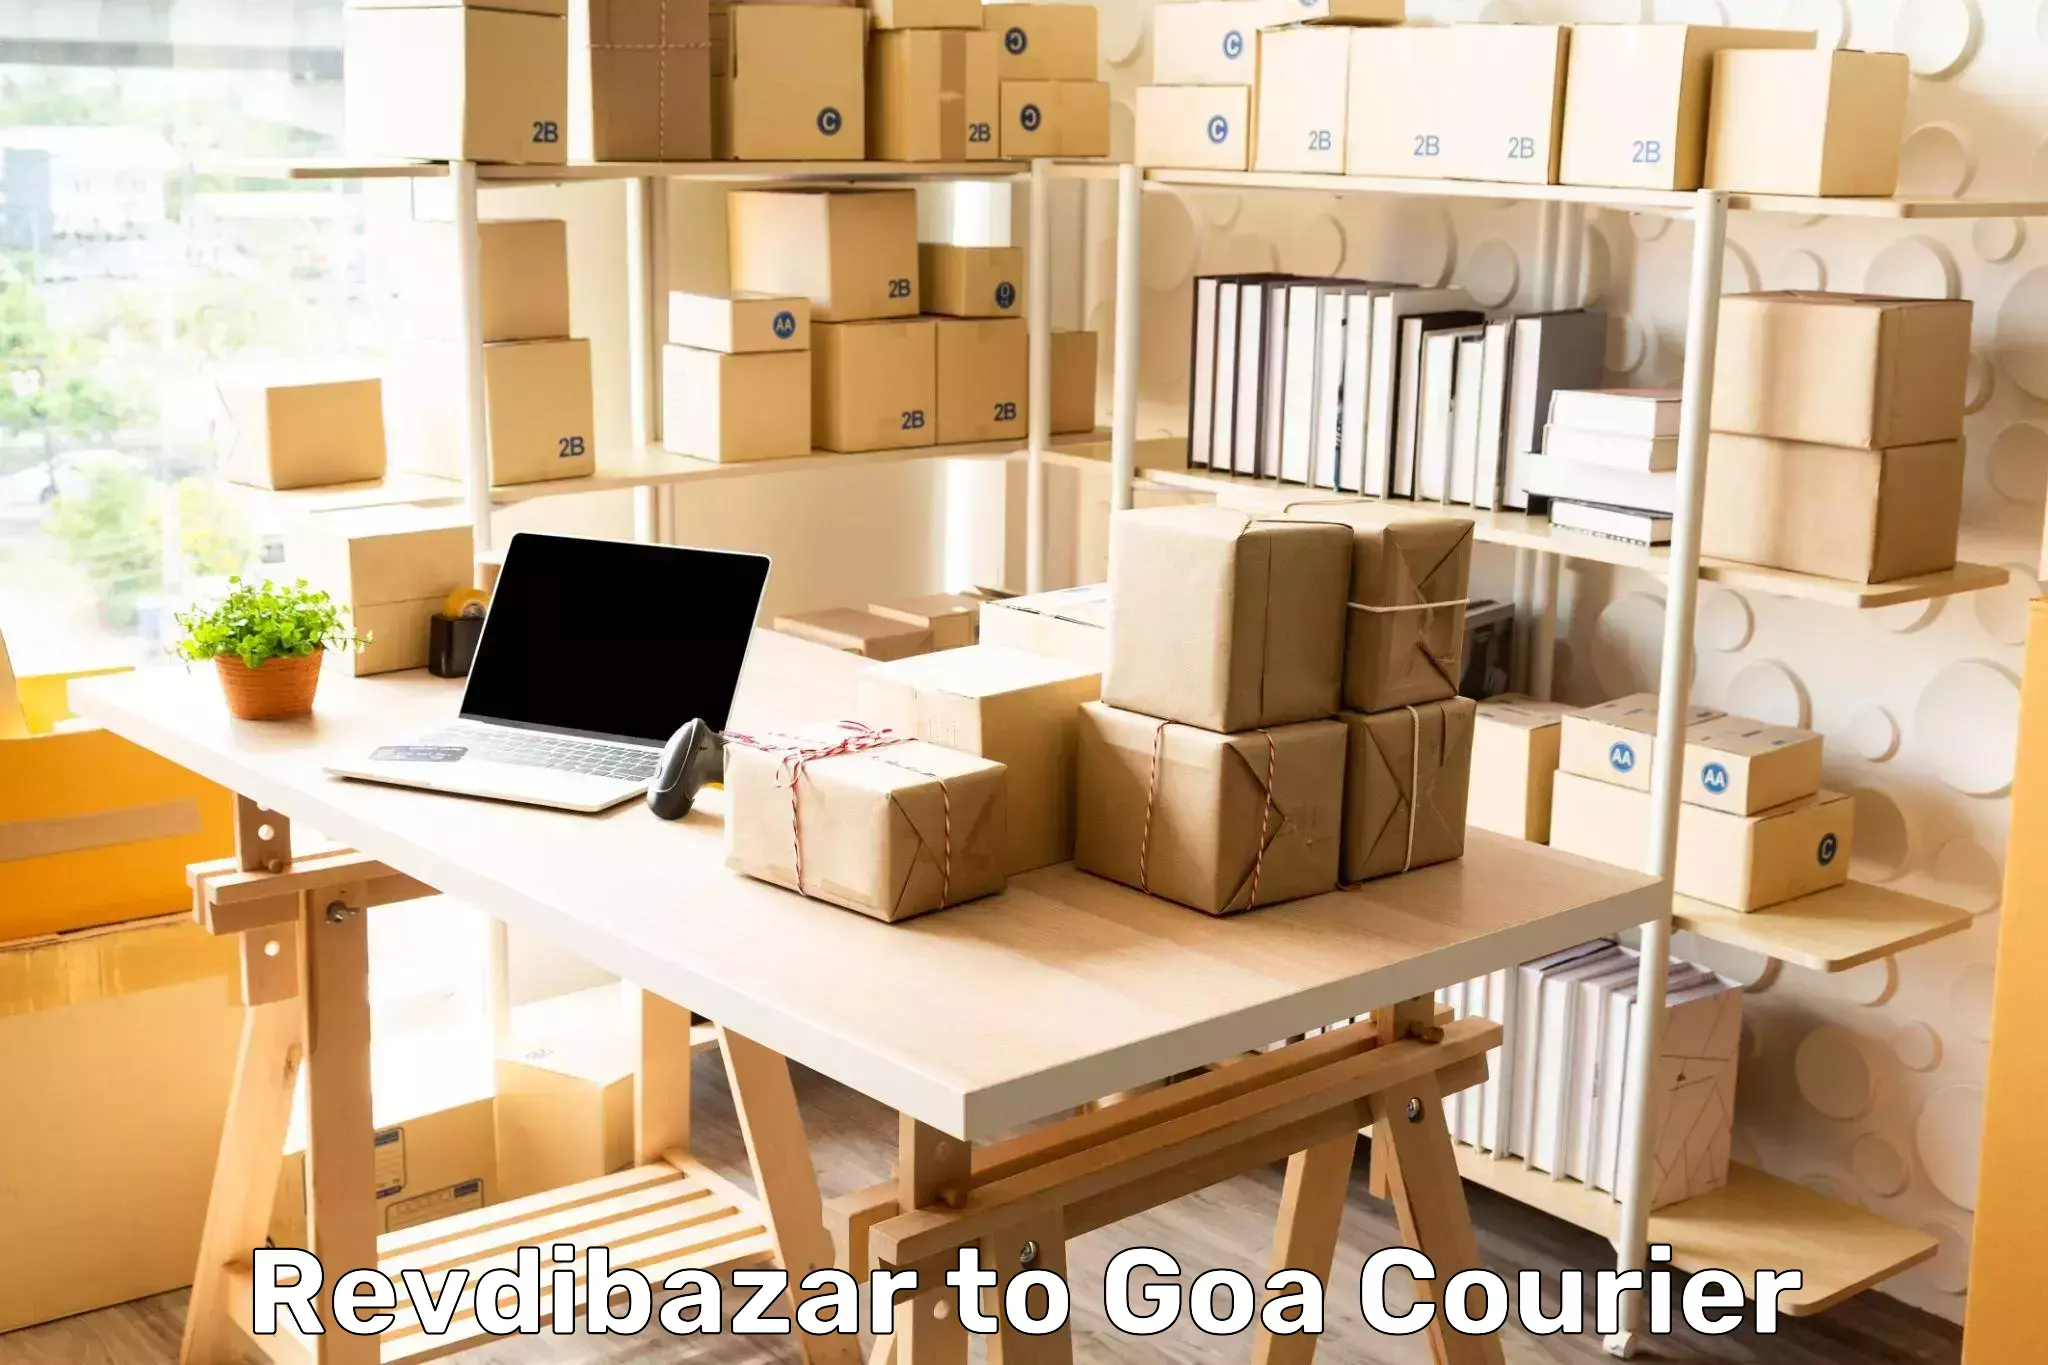 Express package services Revdibazar to Bardez